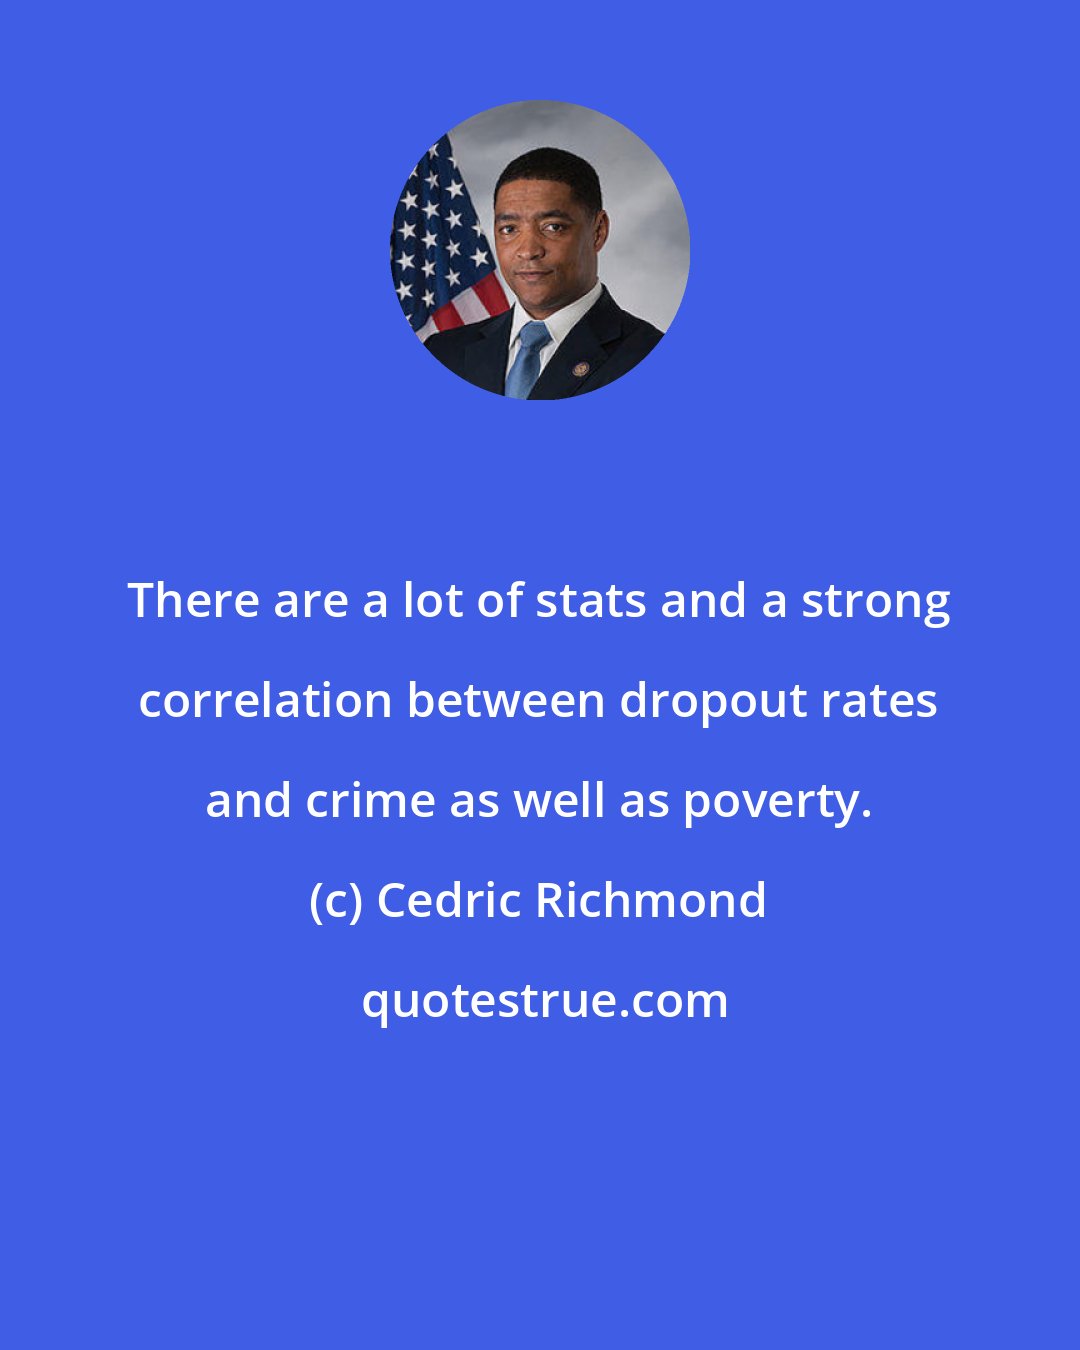 Cedric Richmond: There are a lot of stats and a strong correlation between dropout rates and crime as well as poverty.